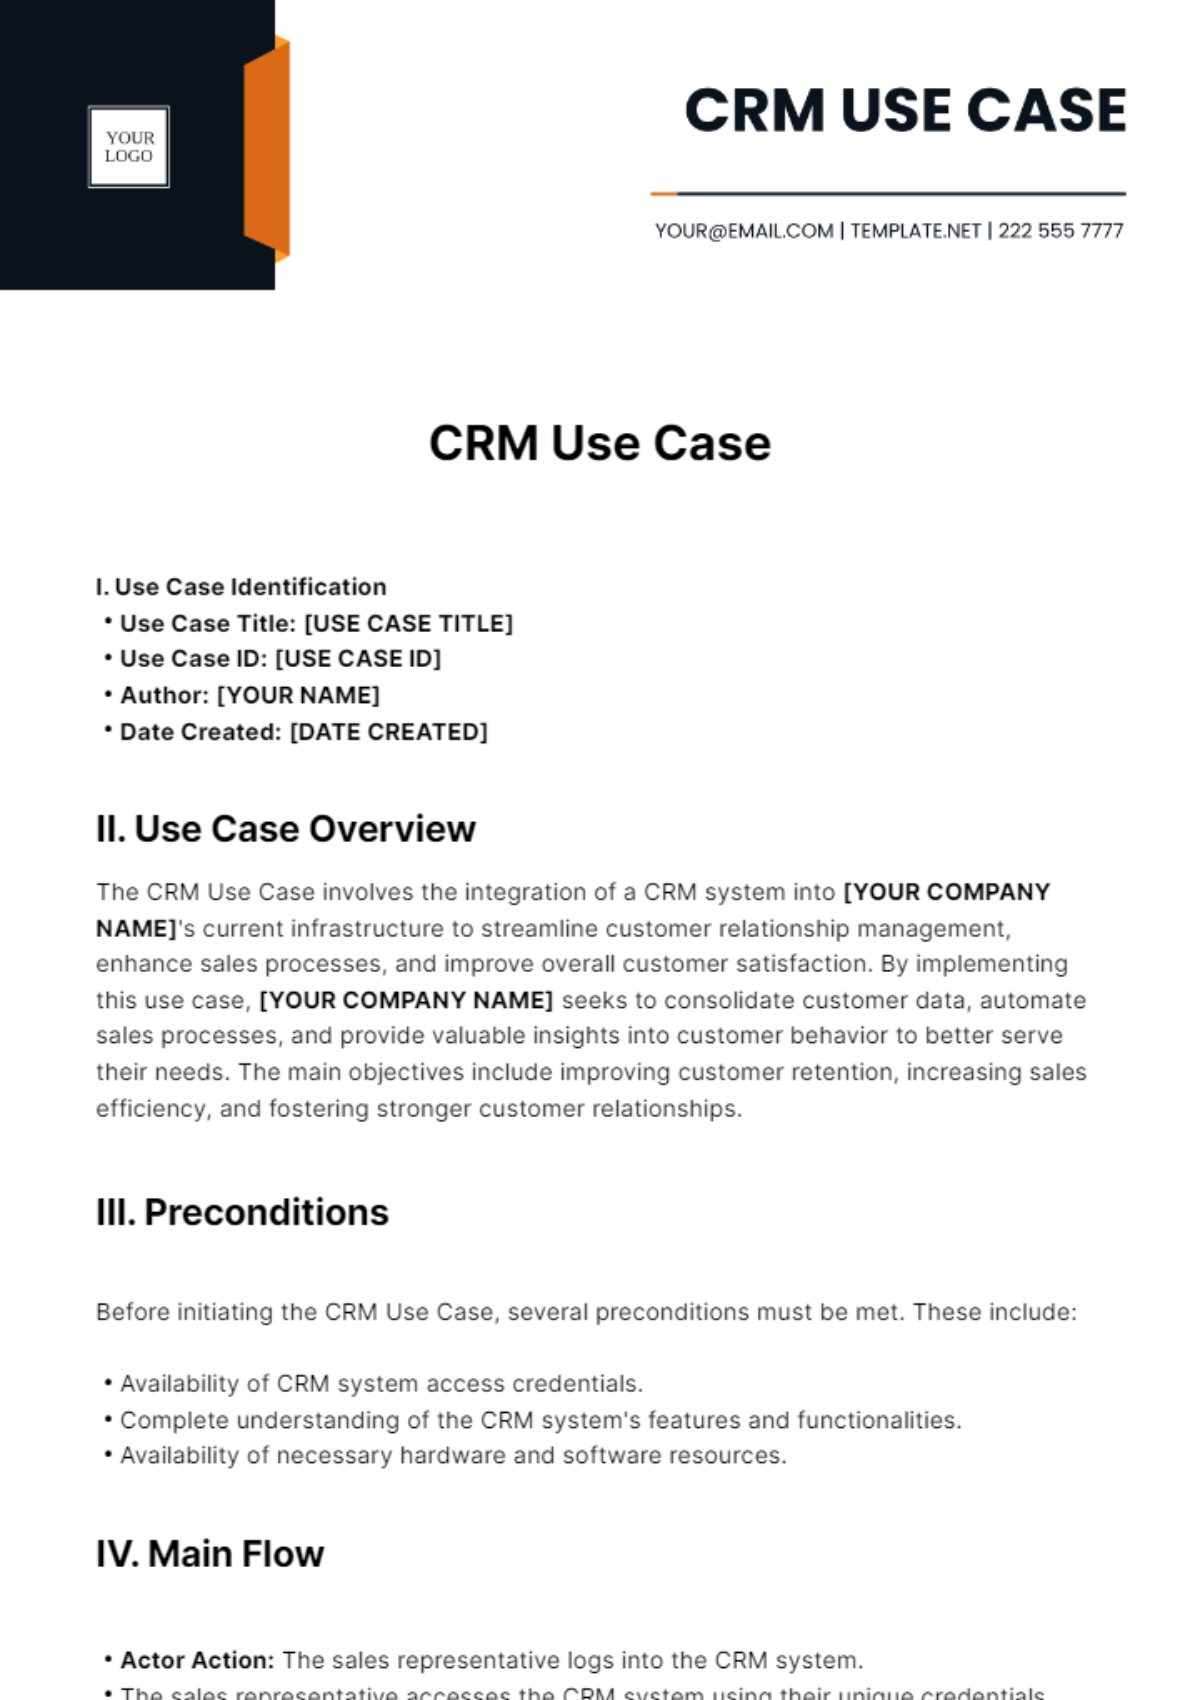 CRM Use Case Template